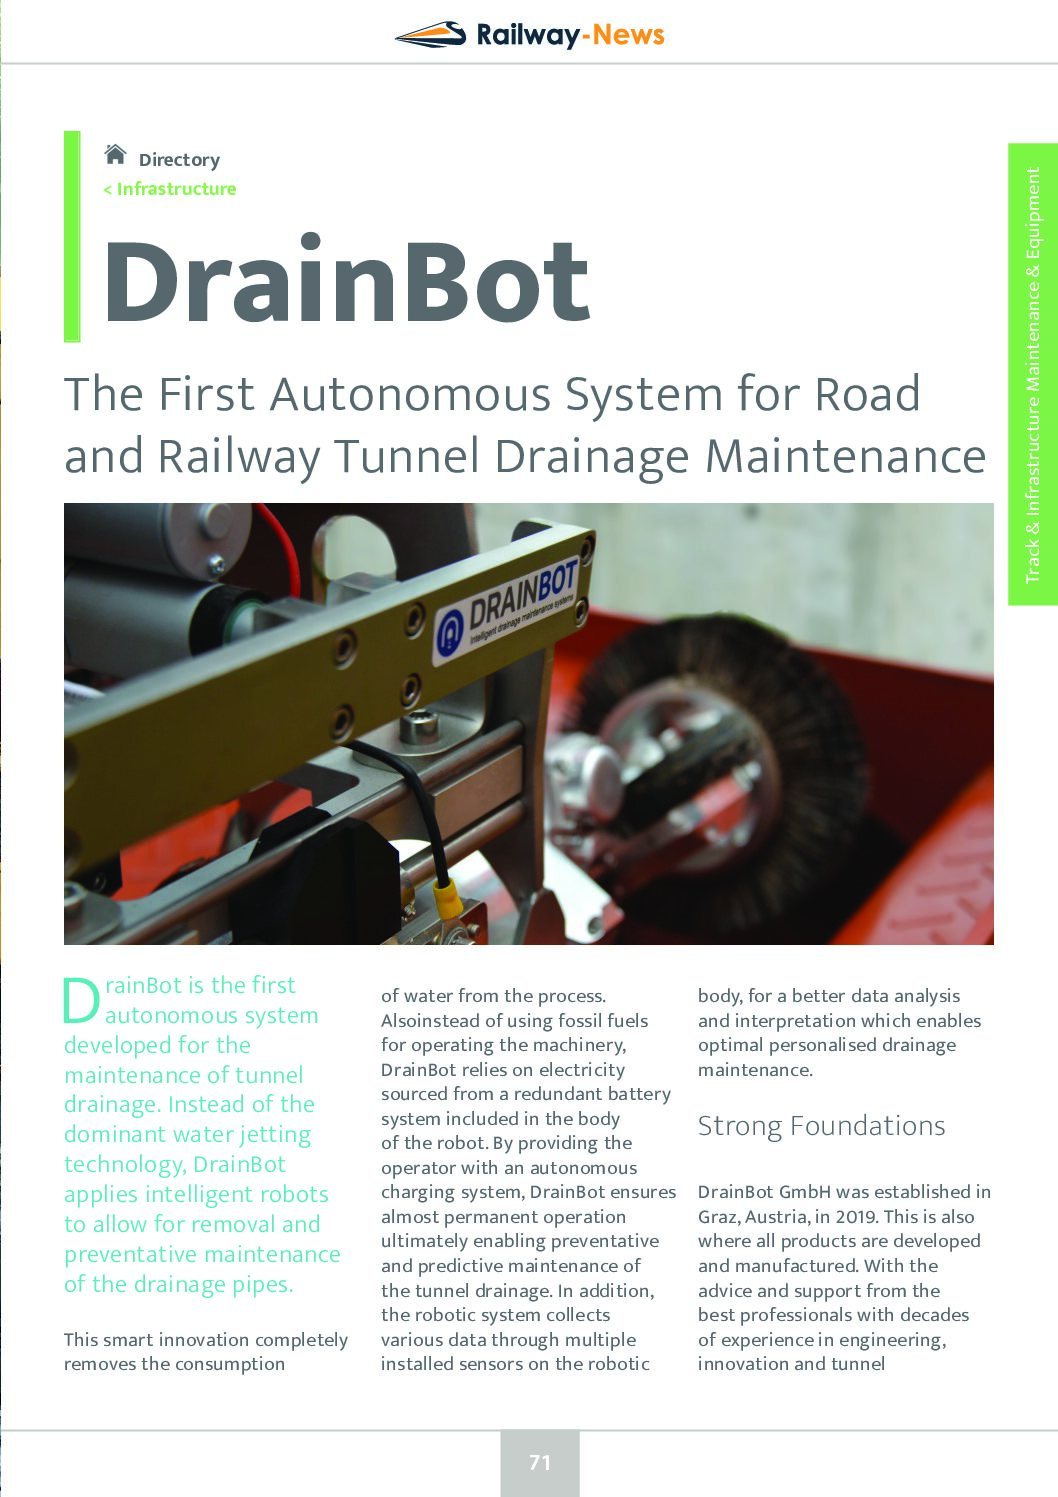 The First Autonomous System for Railway Tunnel Drainage Maintenance